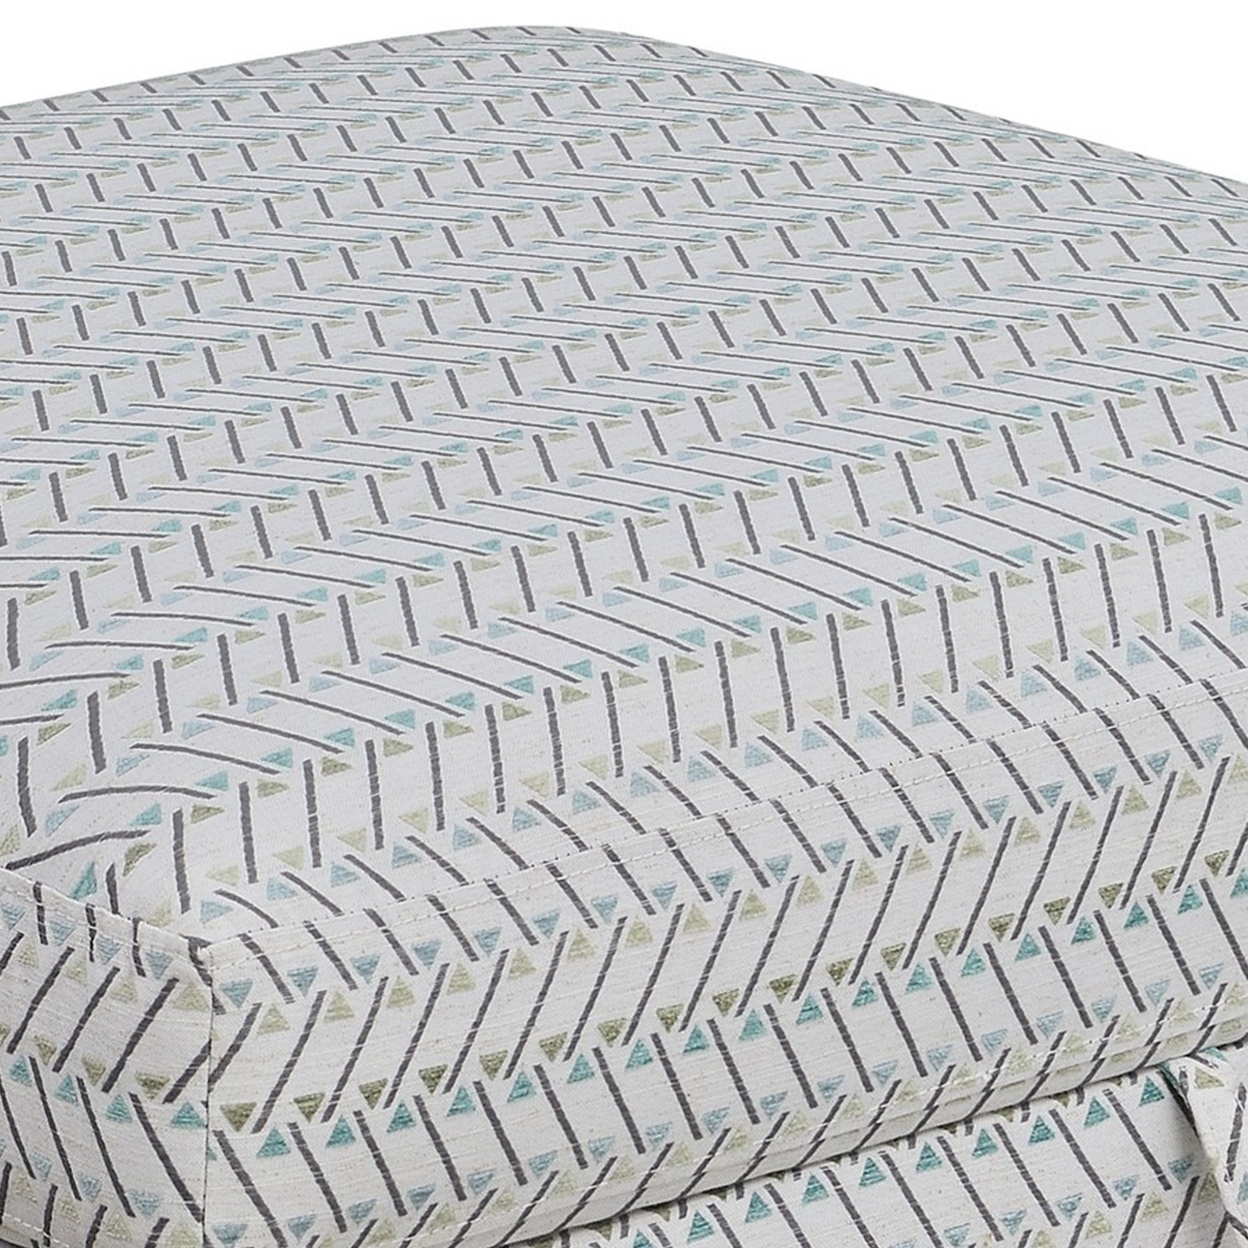 35 Inch Ottoman With Storage, Upholstered Geometric Pattern Printed Fabric